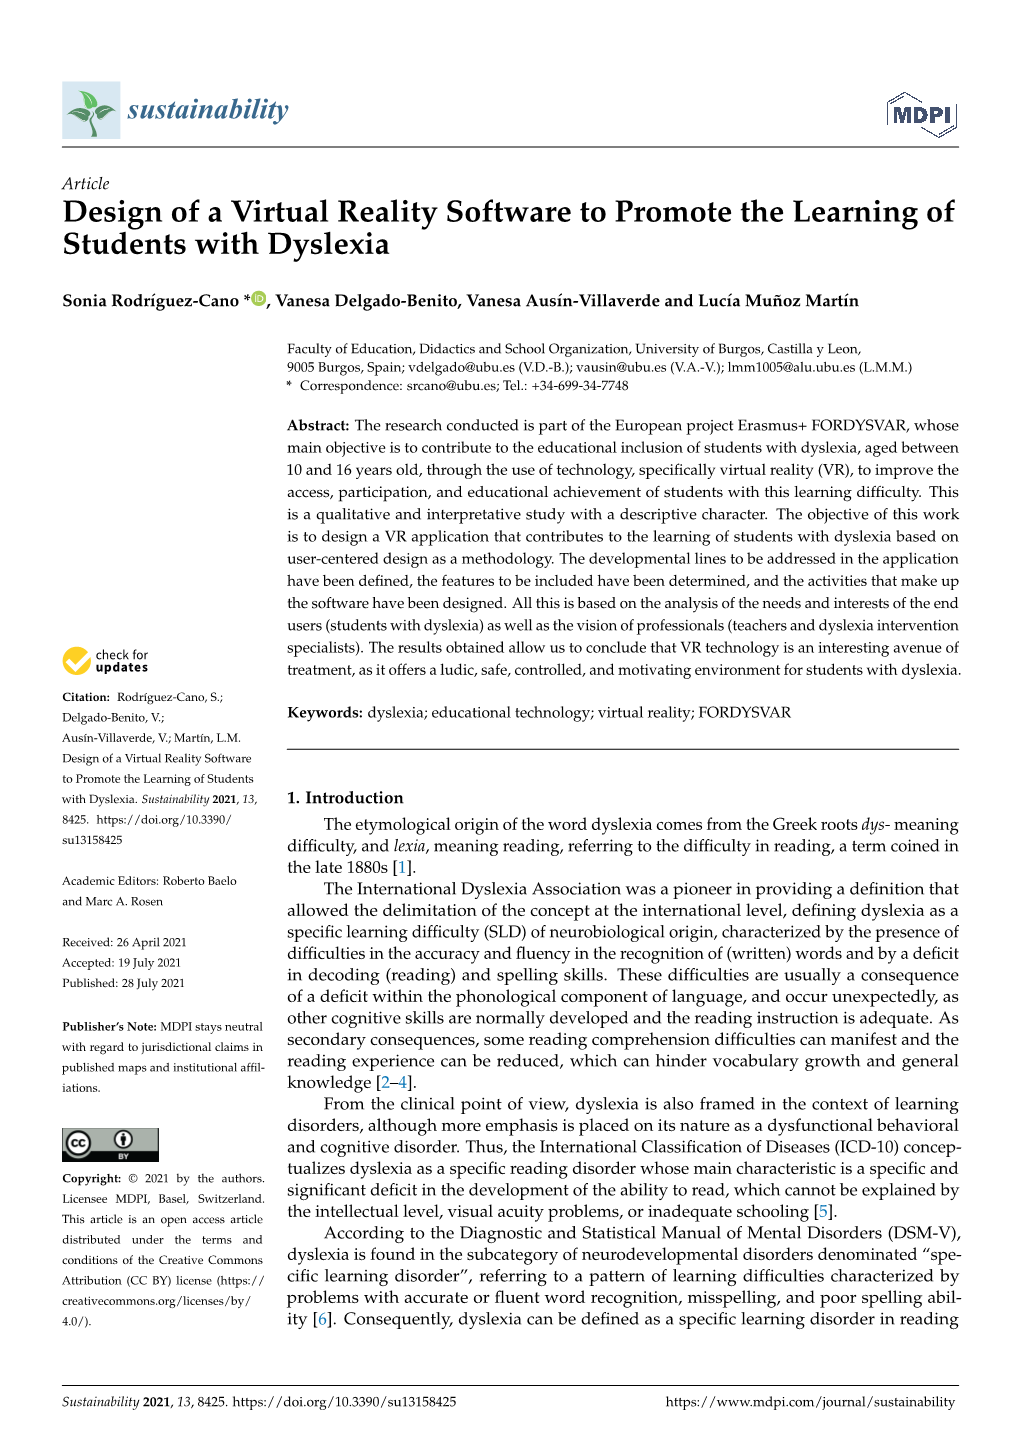 Design of a Virtual Reality Software to Promote the Learning of Students with Dyslexia